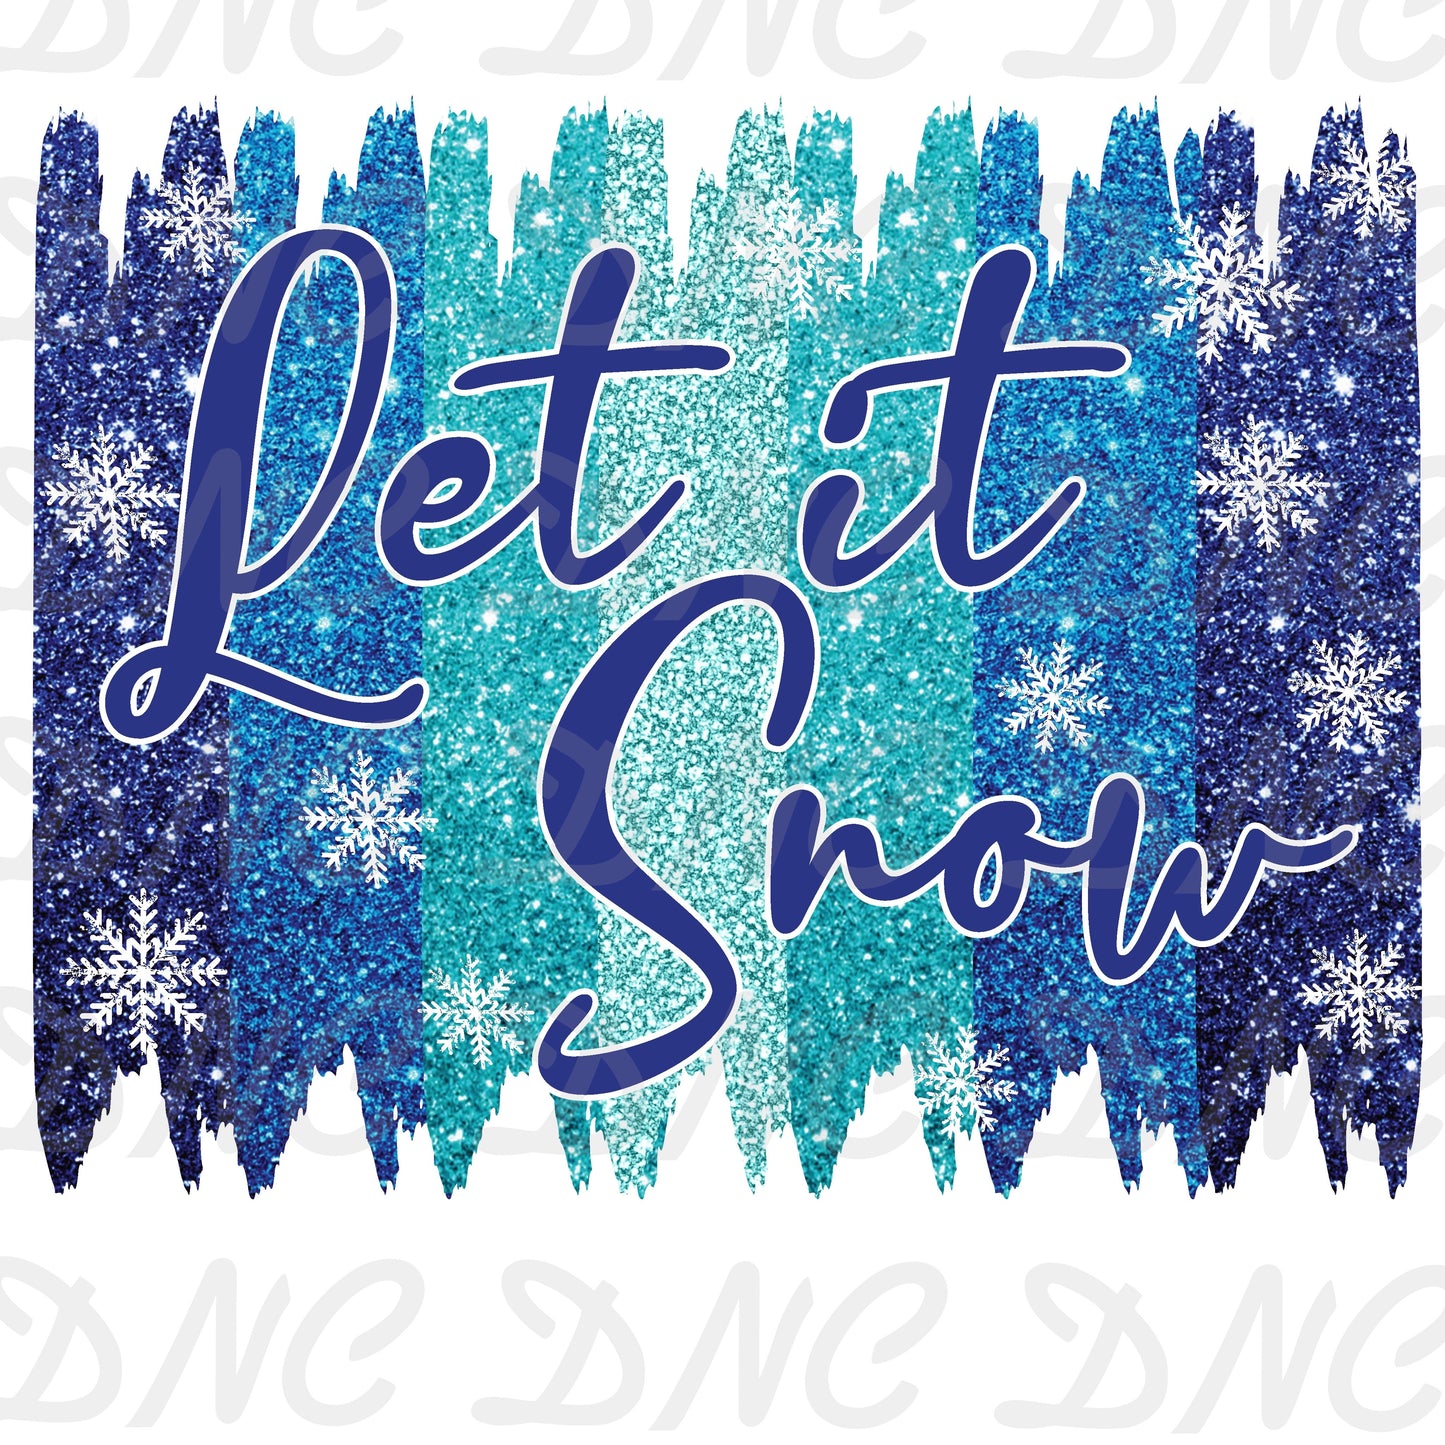 Let it snow blue and white  - Sublimation